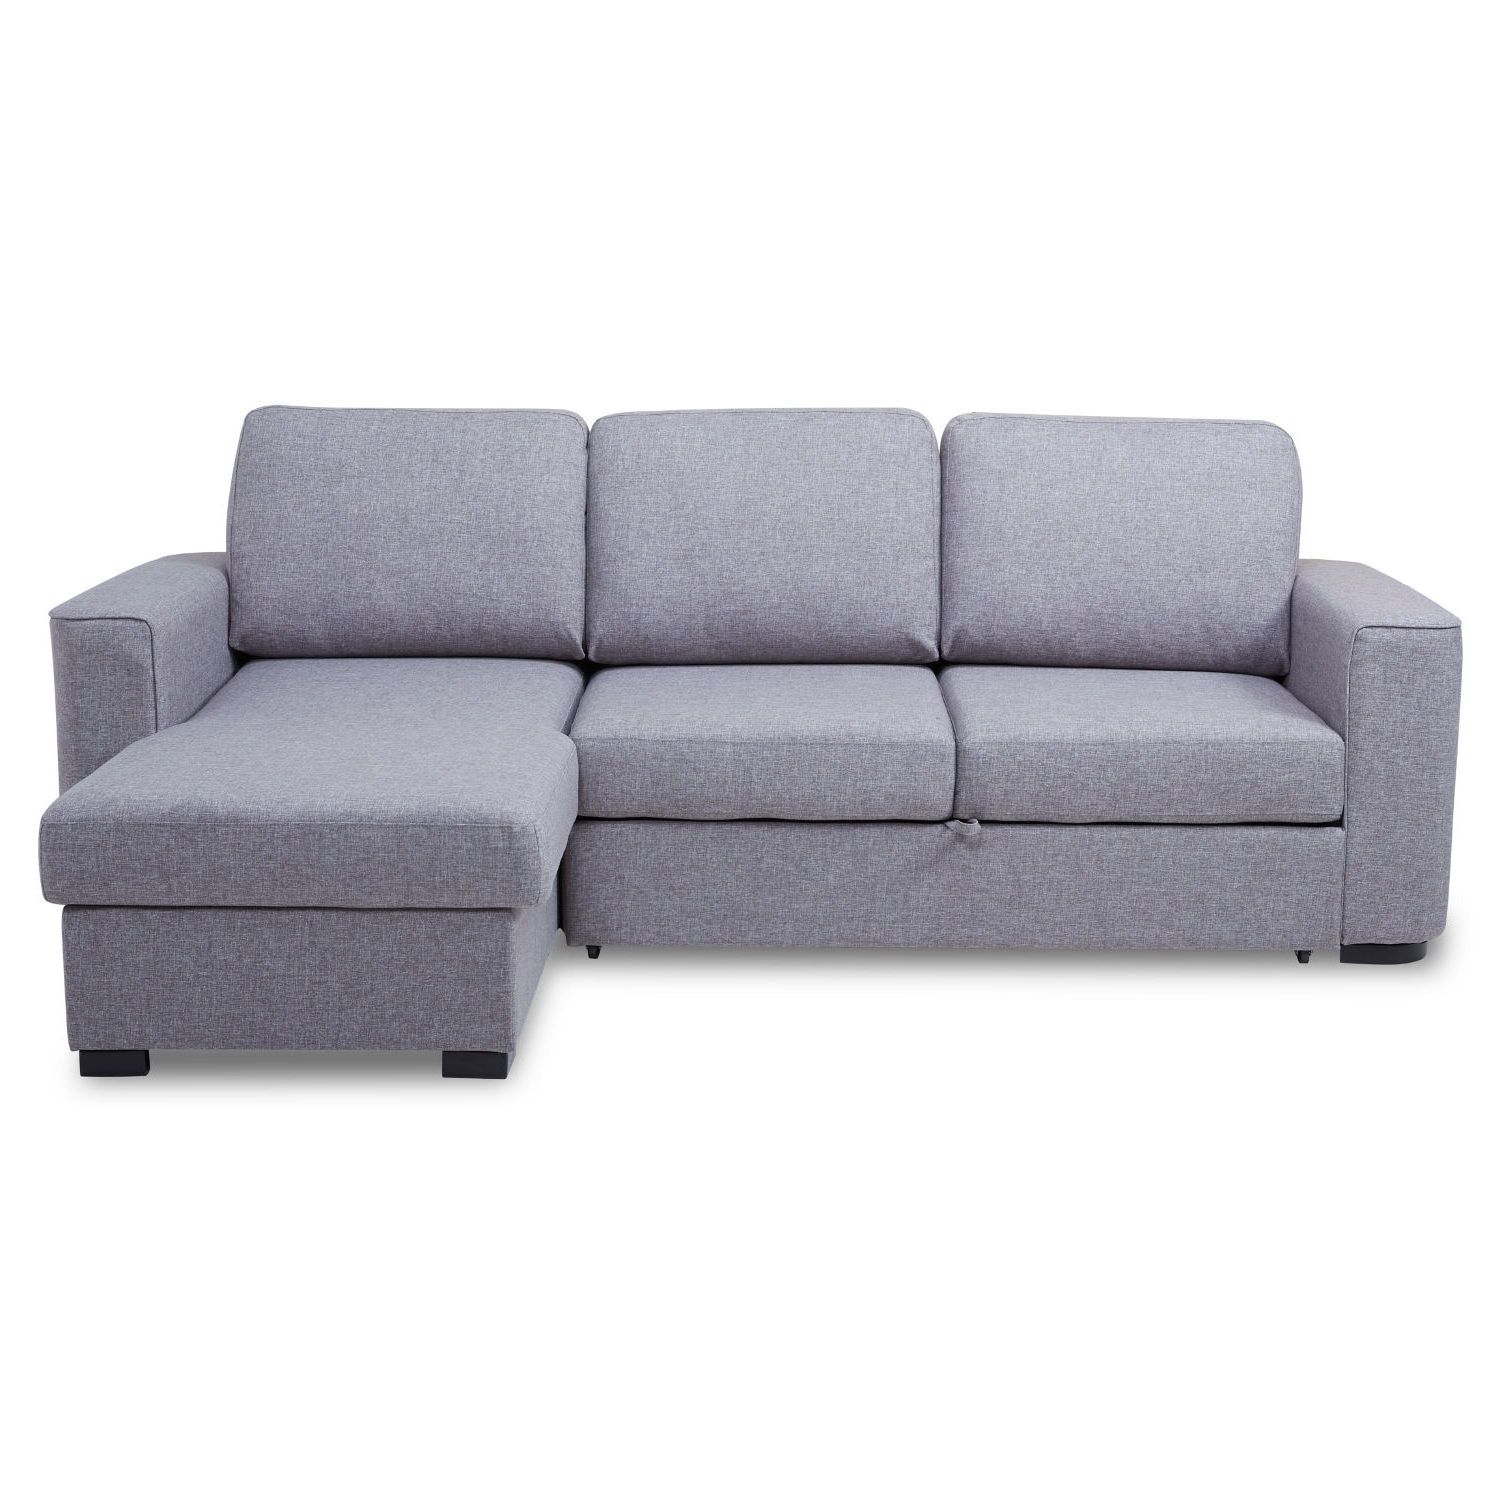 Preferred Chaise Sofa Beds With Ronny Fabric Corner Chaise Sofa Bed With Storage – Next Day (View 6 of 15)